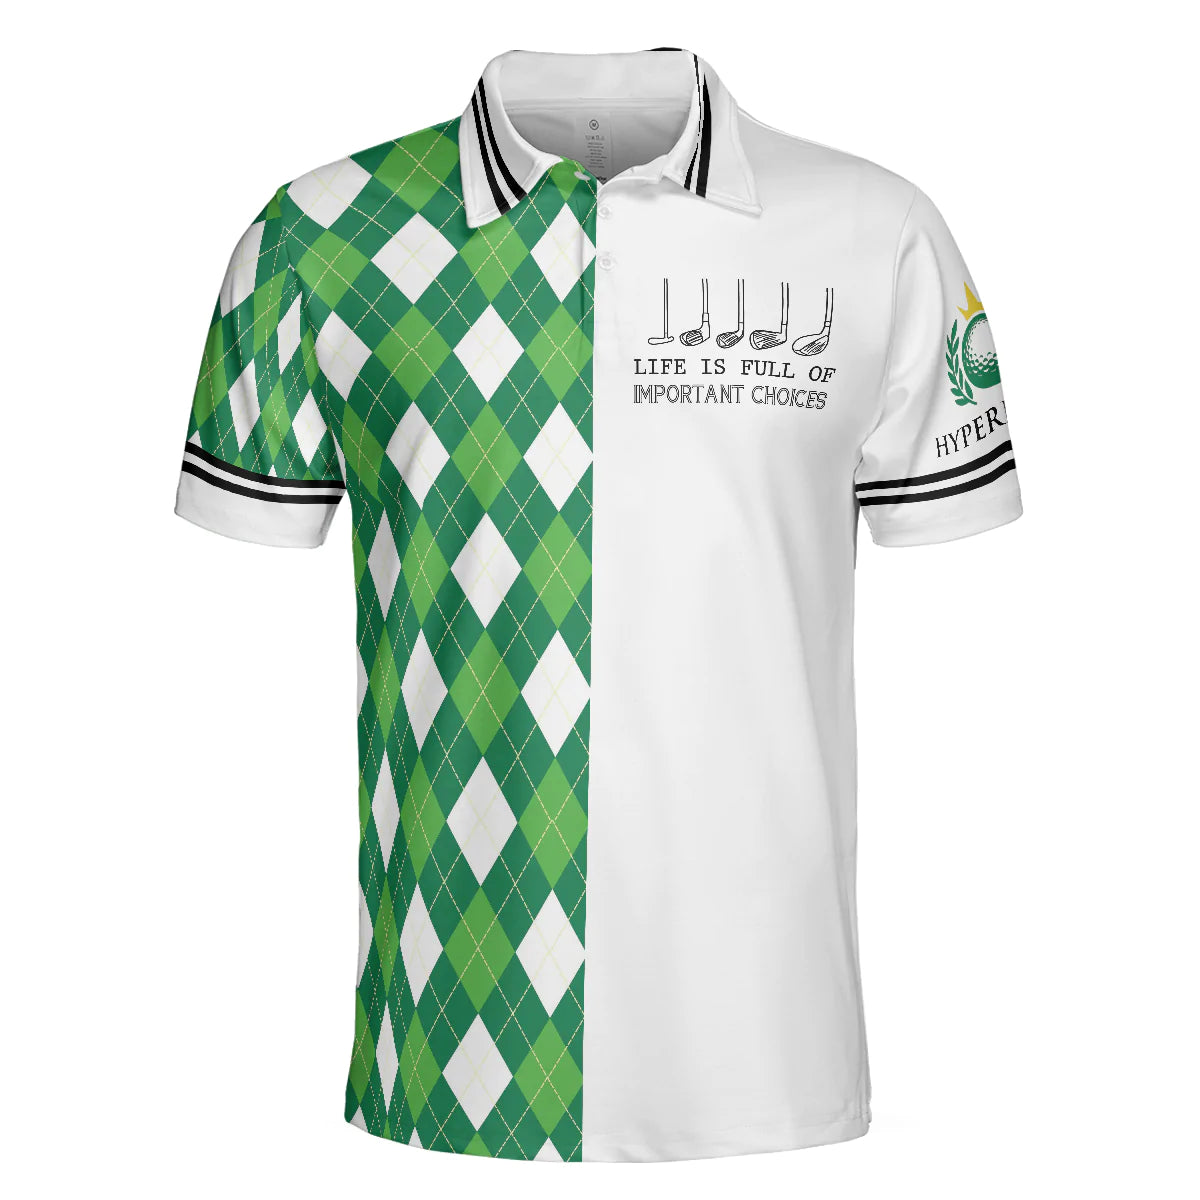 mens polo shirt with green argyle pattern and life is full of important choices design gp362 ioifo